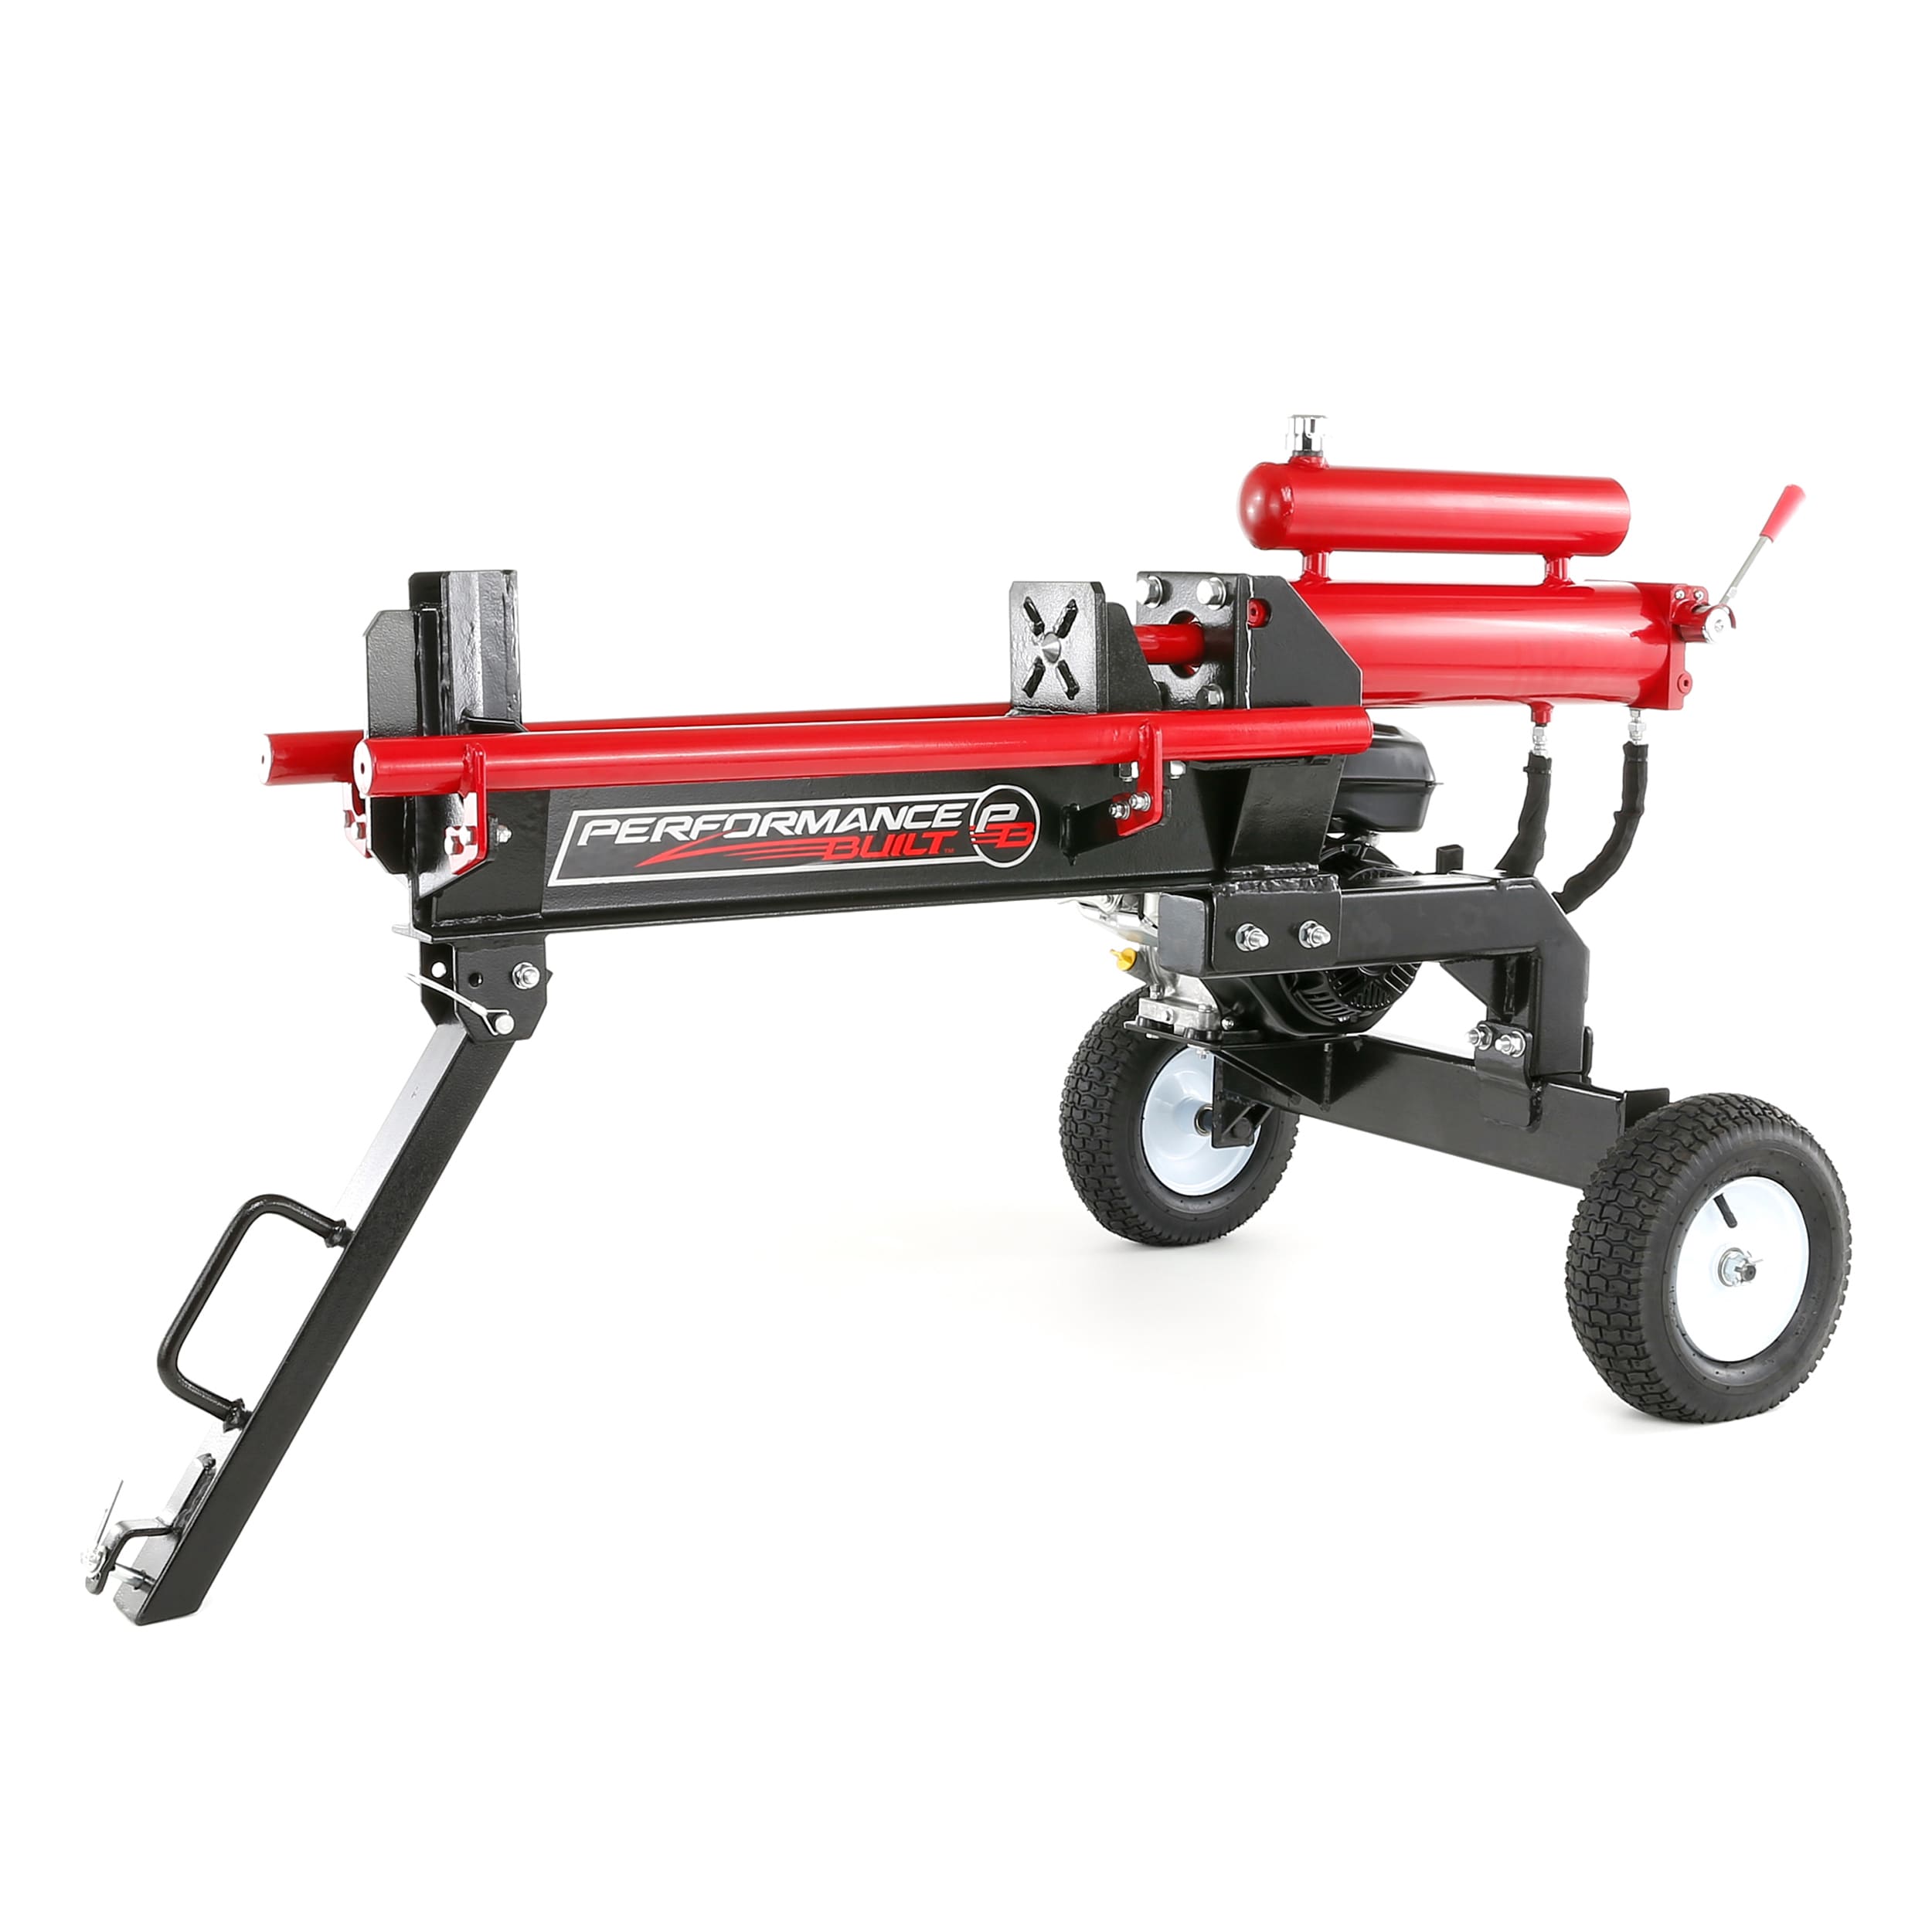 Performance Built 13-Ton 208-cc Horizontal Gas Log Splitter with Briggs and  Stratton Engine at